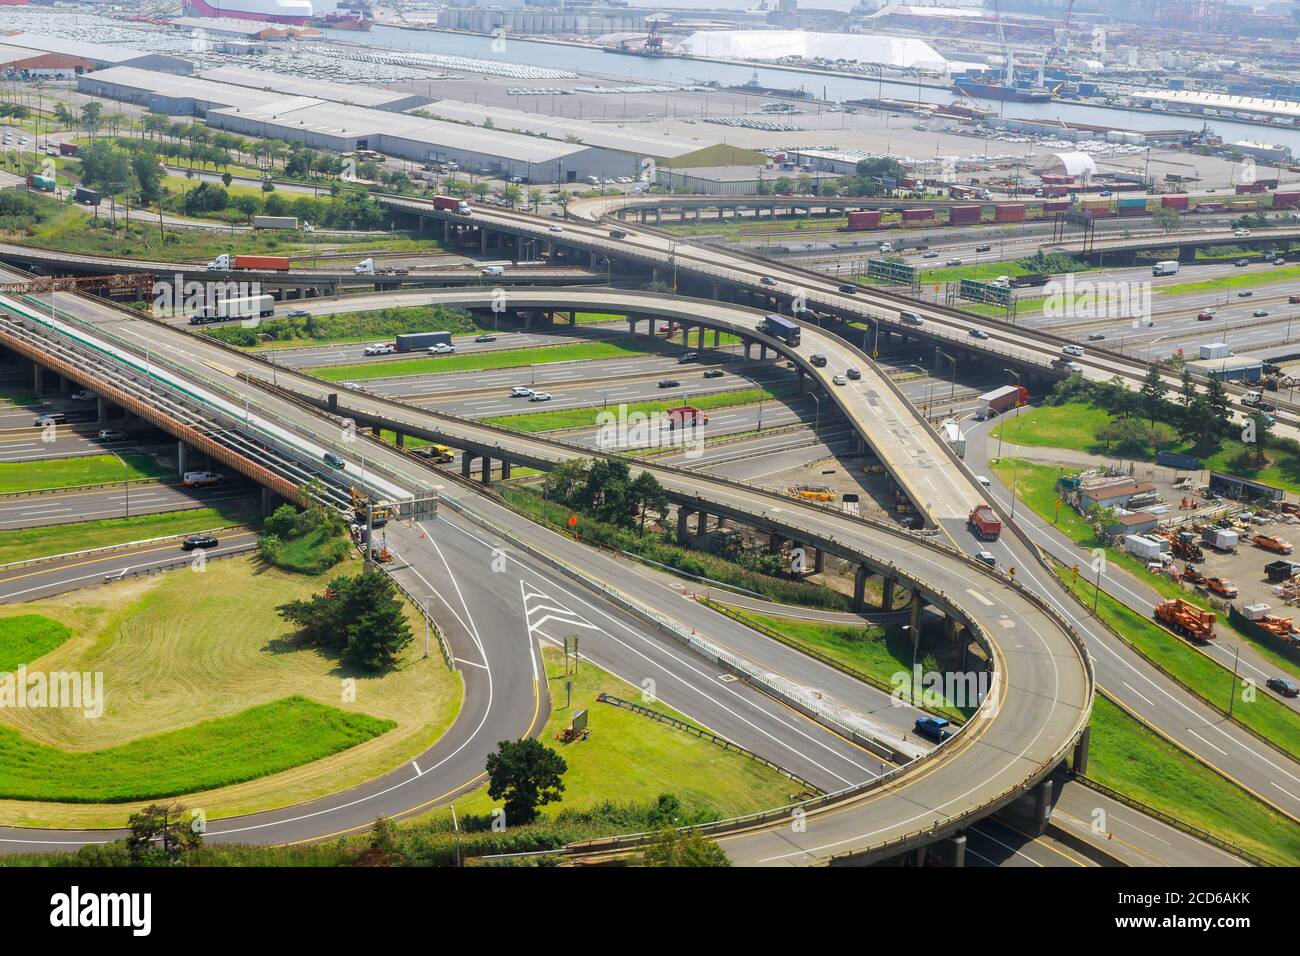 Aerial view of empty highway interchange with disappearing traffic on a bridge and streets roads and lanes crossroads cars Newark NJ USA Stock Photo